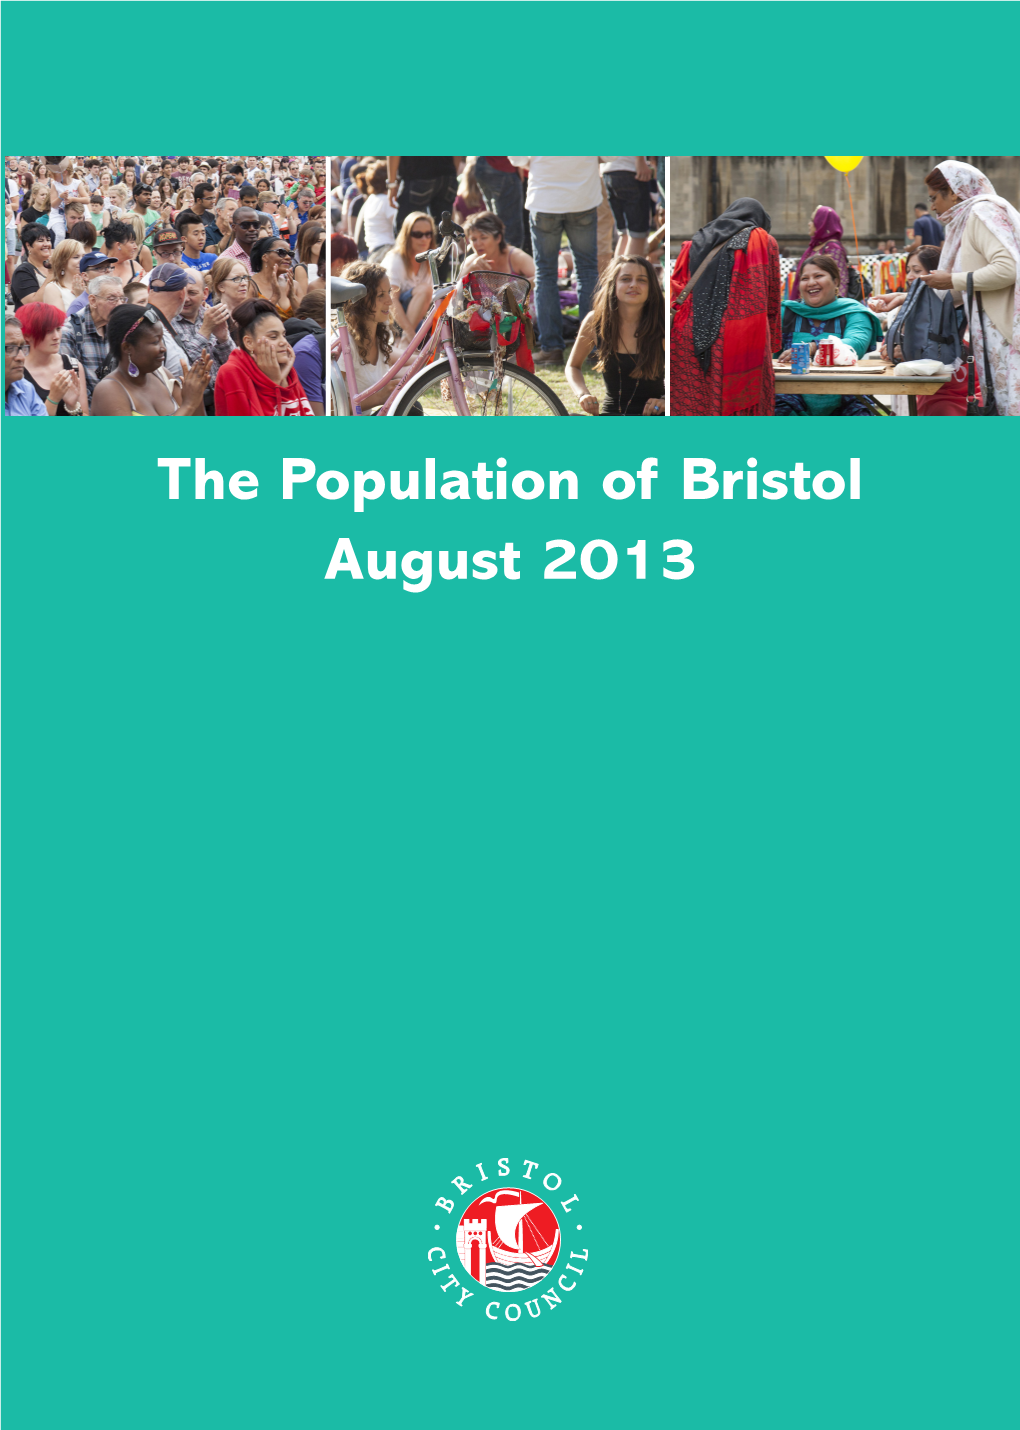 The Population of Bristol August 2013 the Population of Bristol August 2013